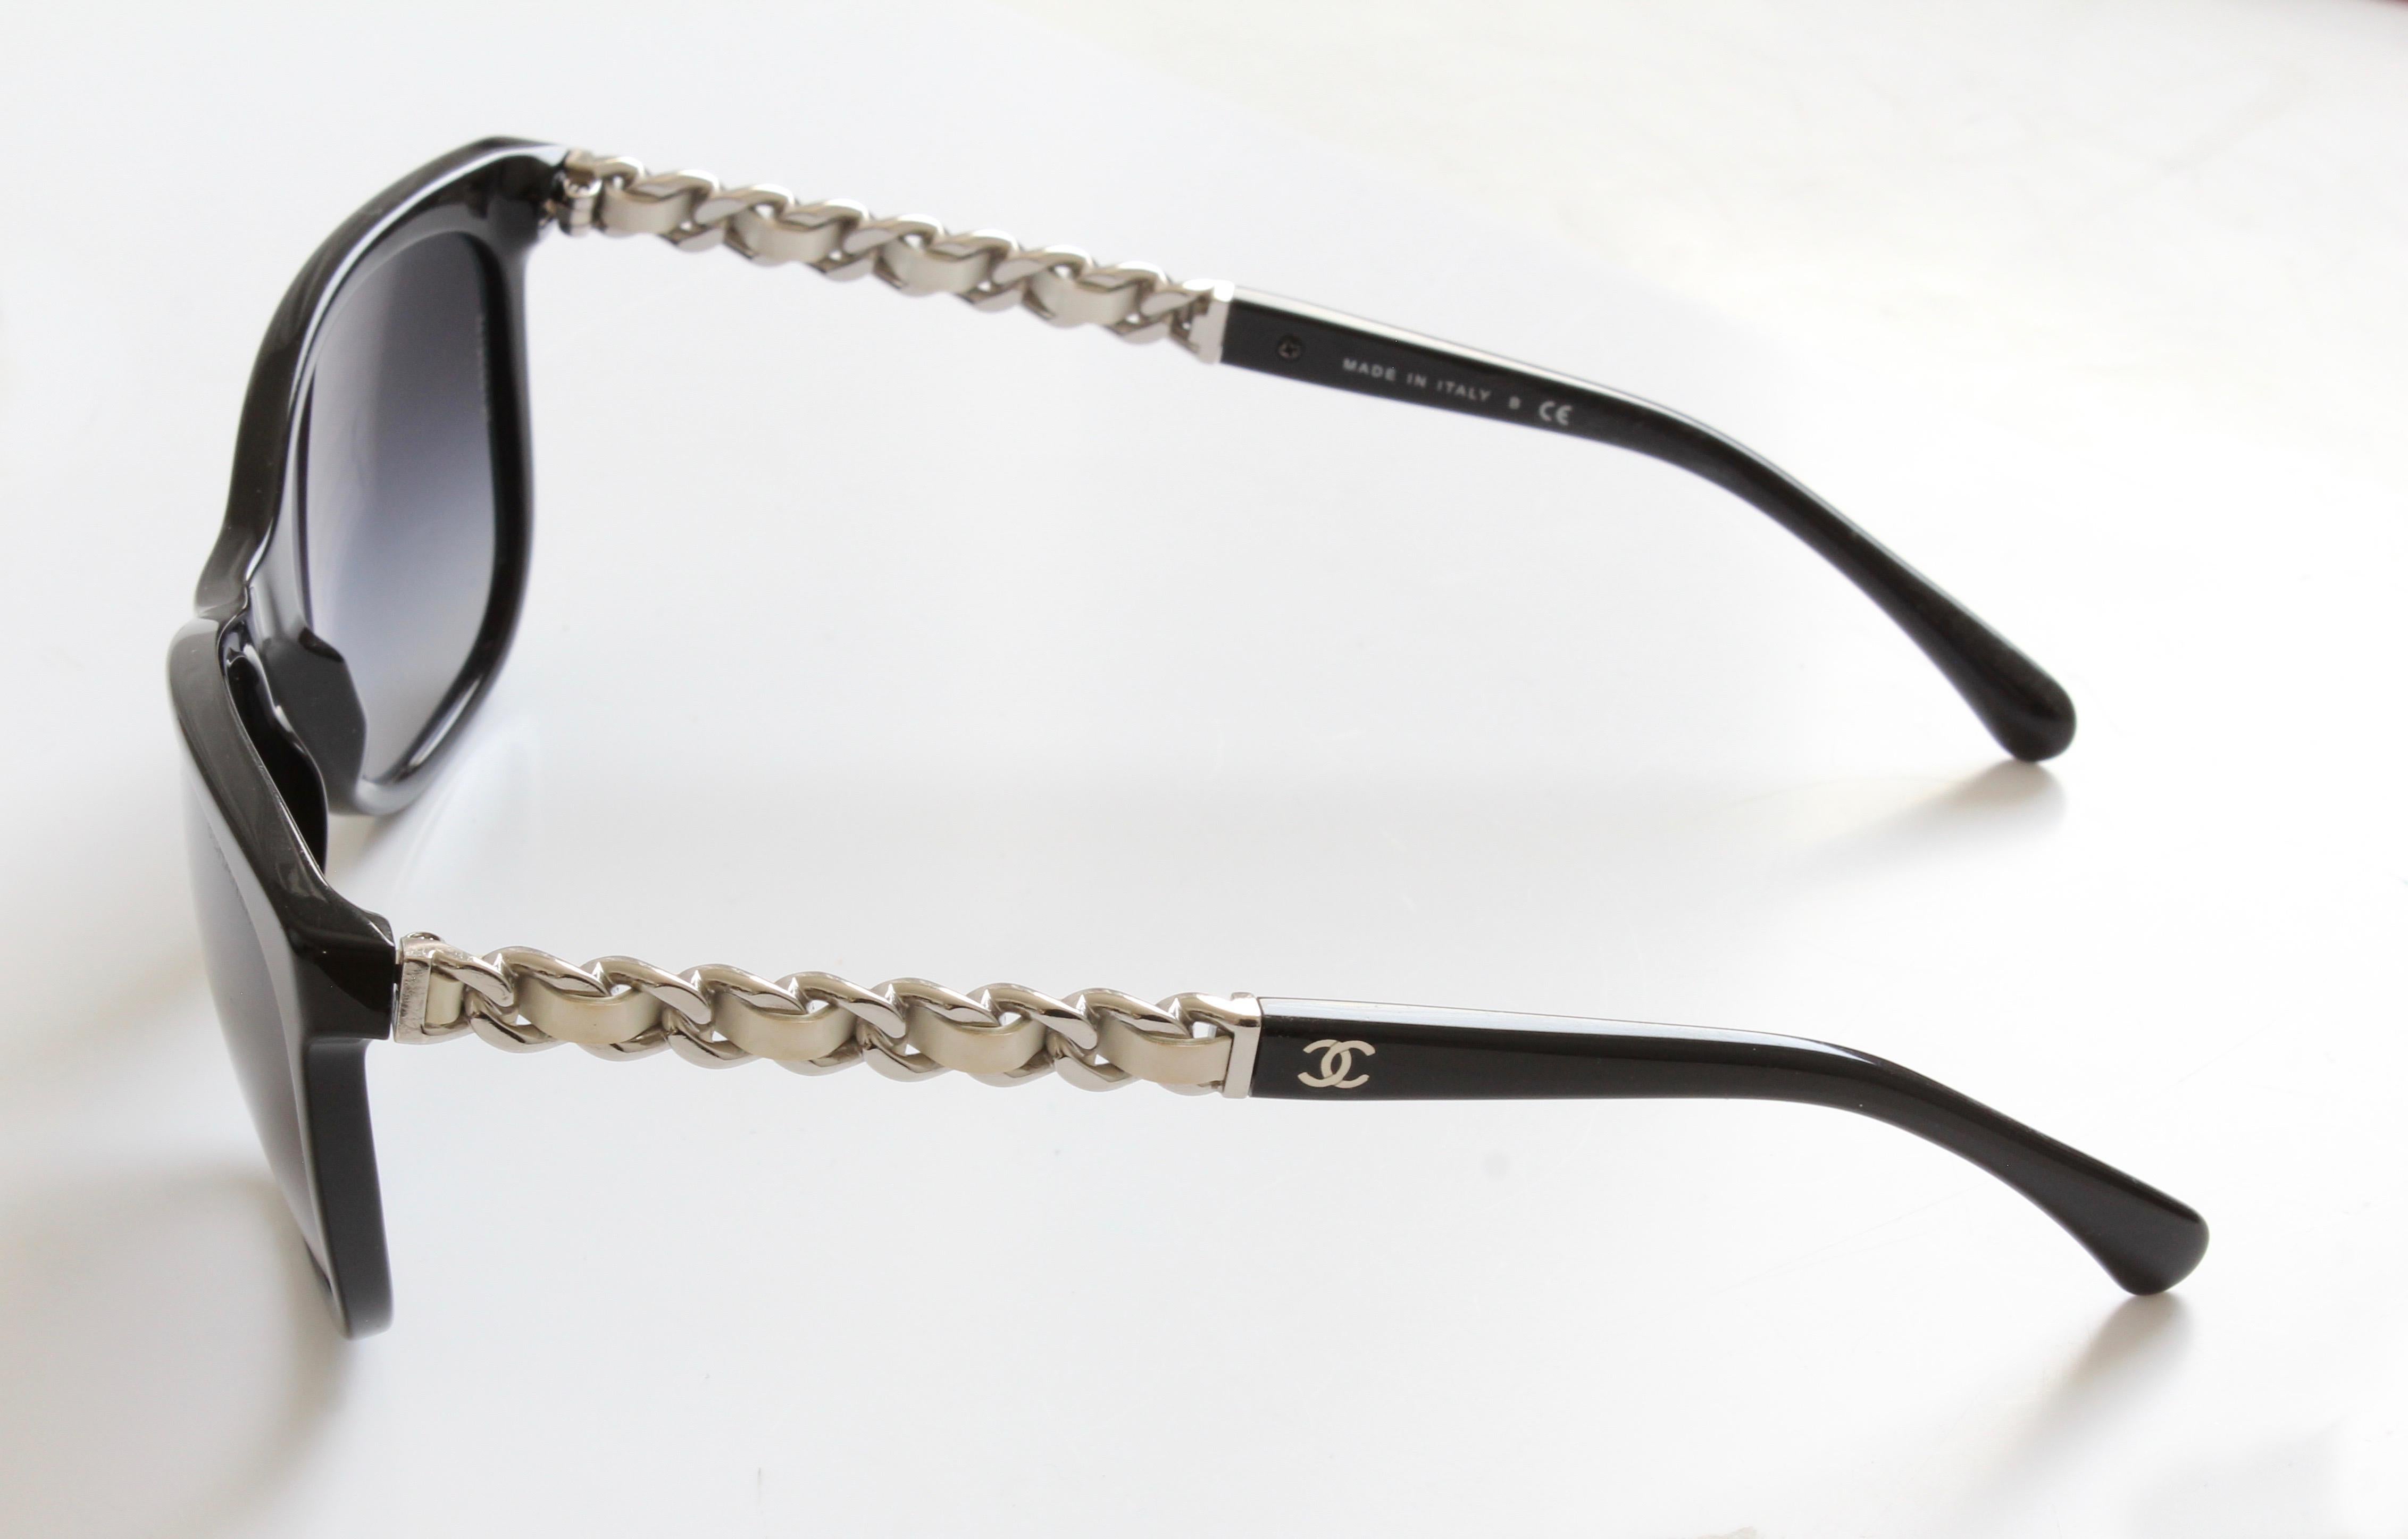 Gray Chanel Cat Eye Silver Chain White Leather Sunglasses with Case, 5260-Q 